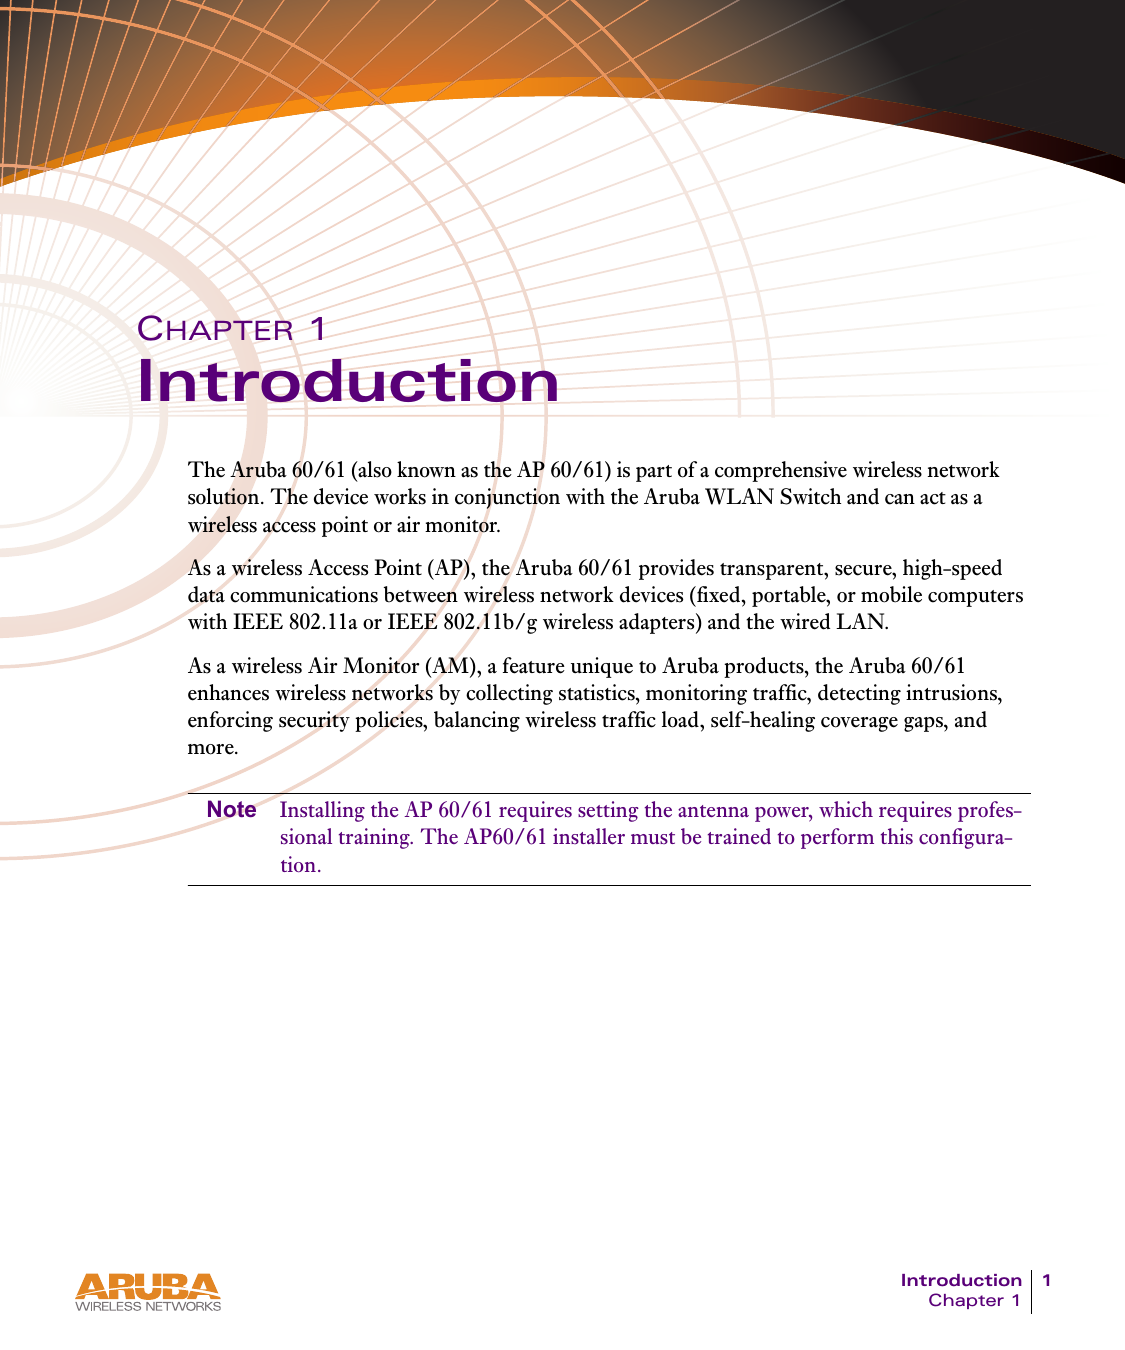 Introduction 1Chapter 1CHAPTER 1IntroductionThe Aruba 60/61 (also known as the AP 60/61) is part of a comprehensive wireless network solution. The device works in conjunction with the Aruba WLAN Switch and can act as a wireless access point or air monitor.As a wireless Access Point (AP), the Aruba 60/61 provides transparent, secure, high-speed data communications between wireless network devices (fixed, portable, or mobile computers with IEEE 802.11a or IEEE 802.11b/g wireless adapters) and the wired LAN.As a wireless Air Monitor (AM), a feature unique to Aruba products, the Aruba 60/61 enhances wireless networks by collecting statistics, monitoring traffic, detecting intrusions, enforcing security policies, balancing wireless traffic load, self-healing coverage gaps, and more.Note Installing the AP 60/61 requires setting the antenna power, which requires profes-sional training. The AP60/61 installer must be trained to perform this configura-tion.